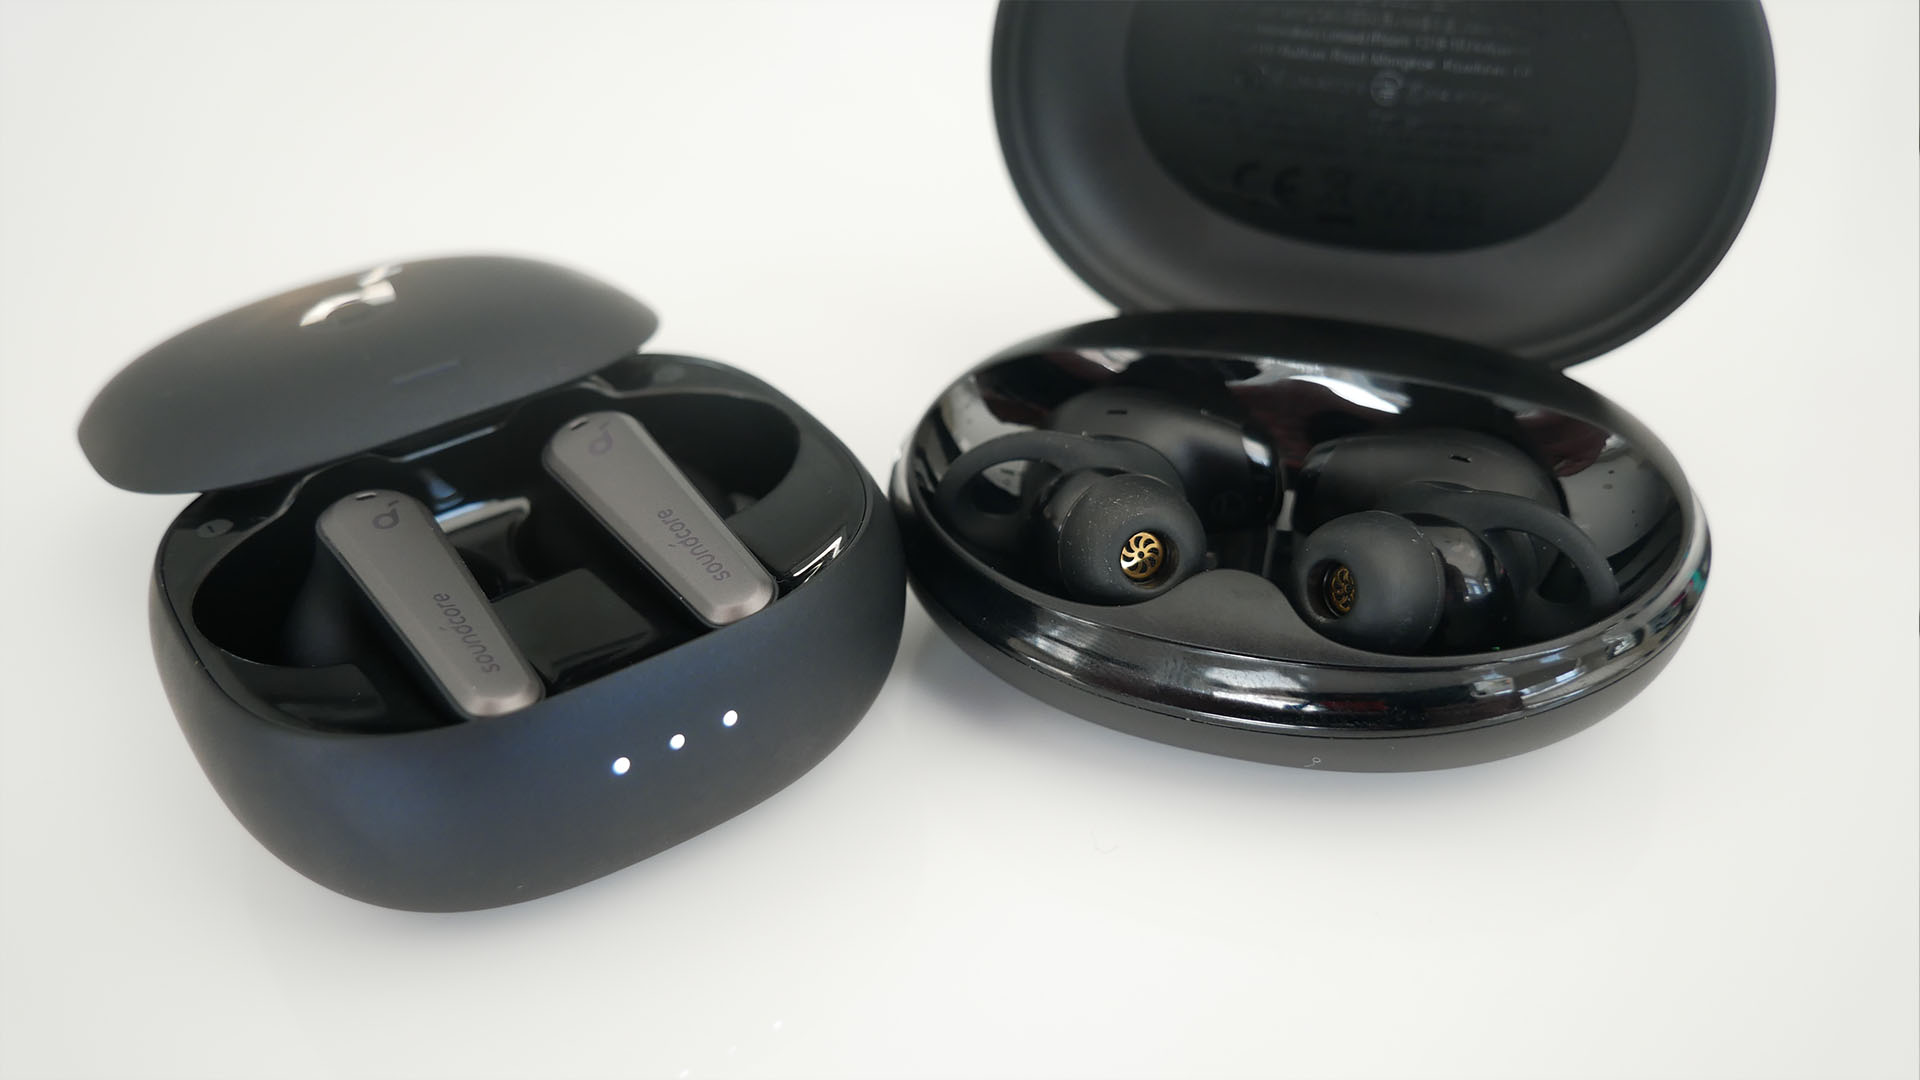 Image of Liberty Air Pro and Life Dot earbuds from Soundcore